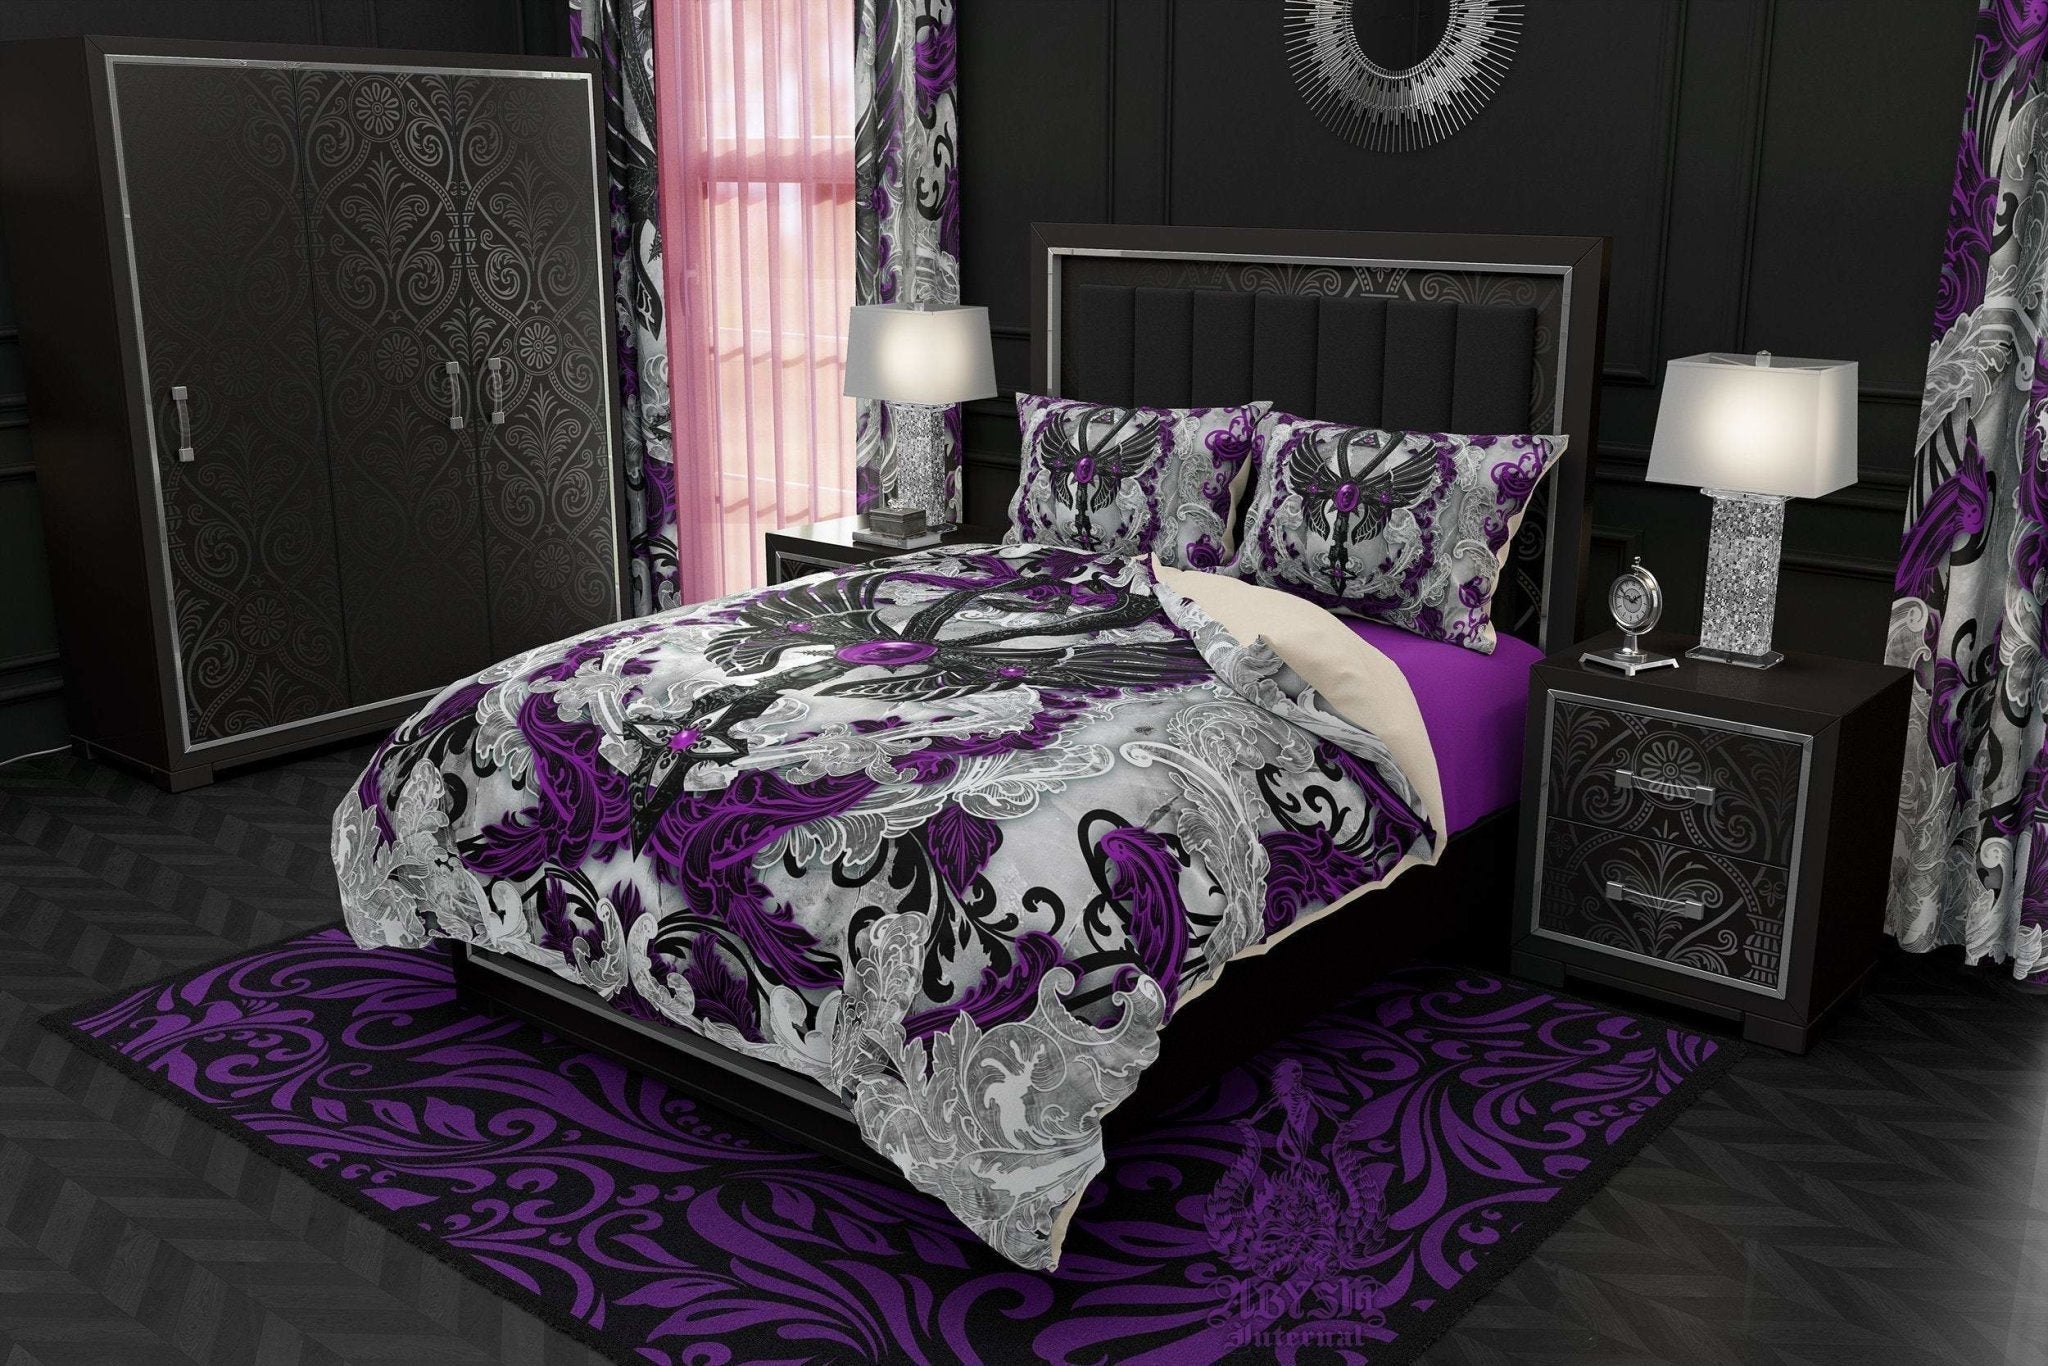 White Goth Comforter or Duvet, Ankh Bed Cover, Gothic Bedroom Decor, King, Queen & Twin Bedding Set - Purple - Abysm Internal